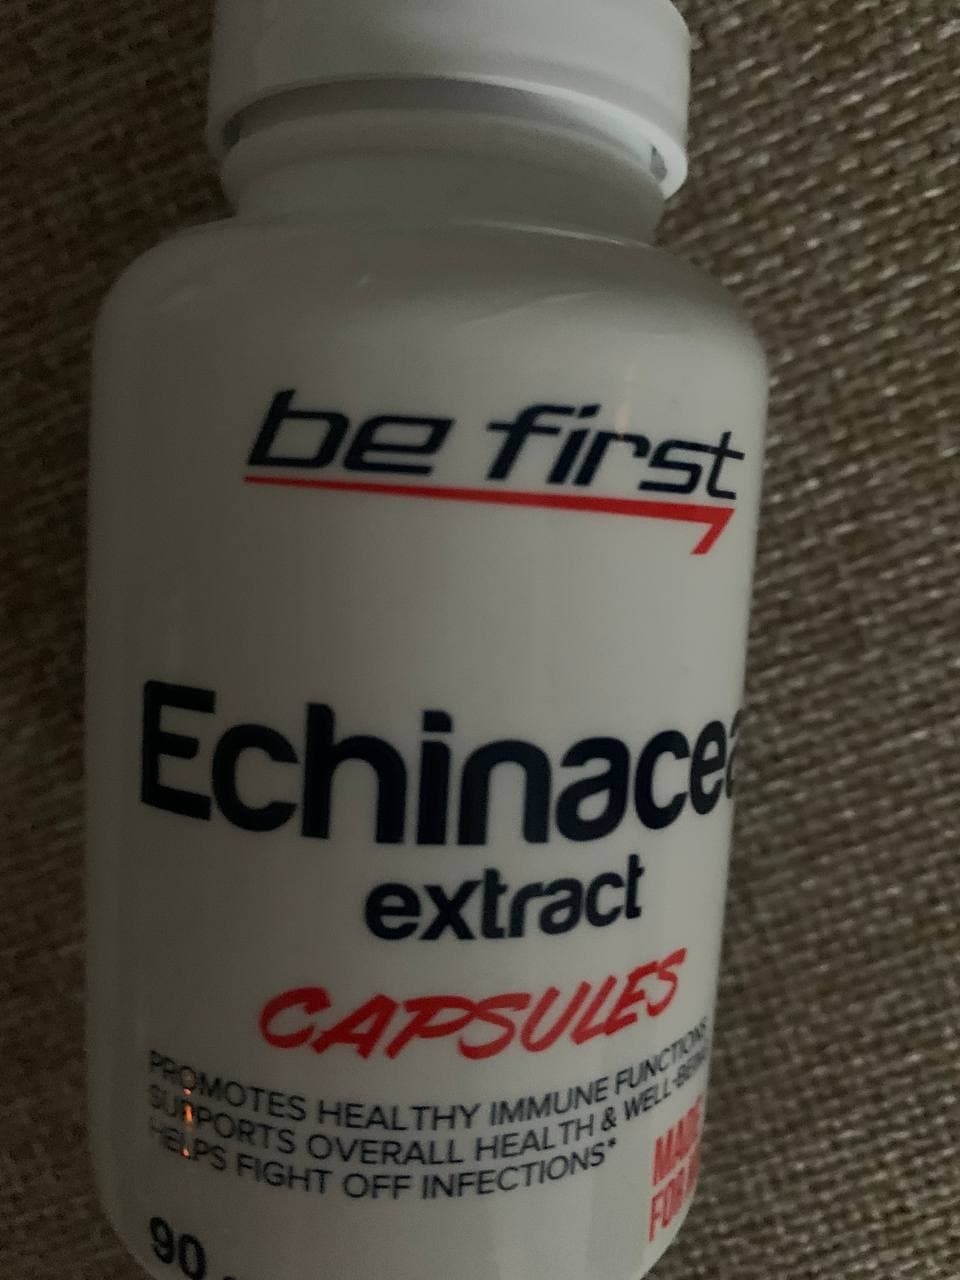 Be First Echinacea extract capsules, 90 капсул - Банки мне на долго хватает